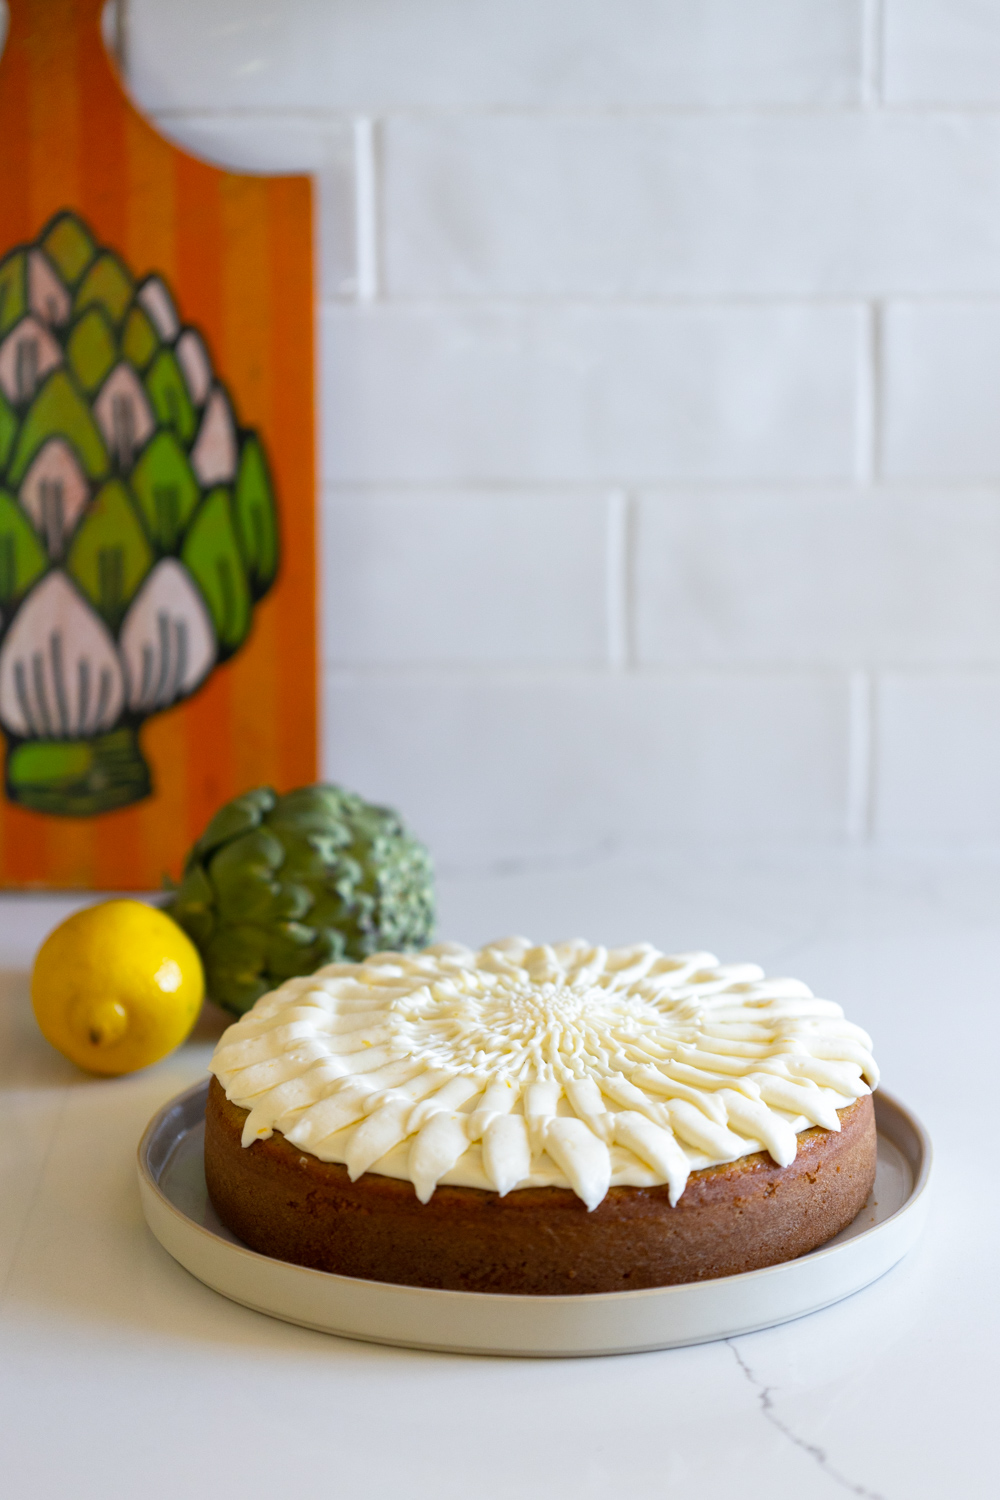 Artichoke Olive Oil Cake with Lemon Cream Cheese Frosting on counter